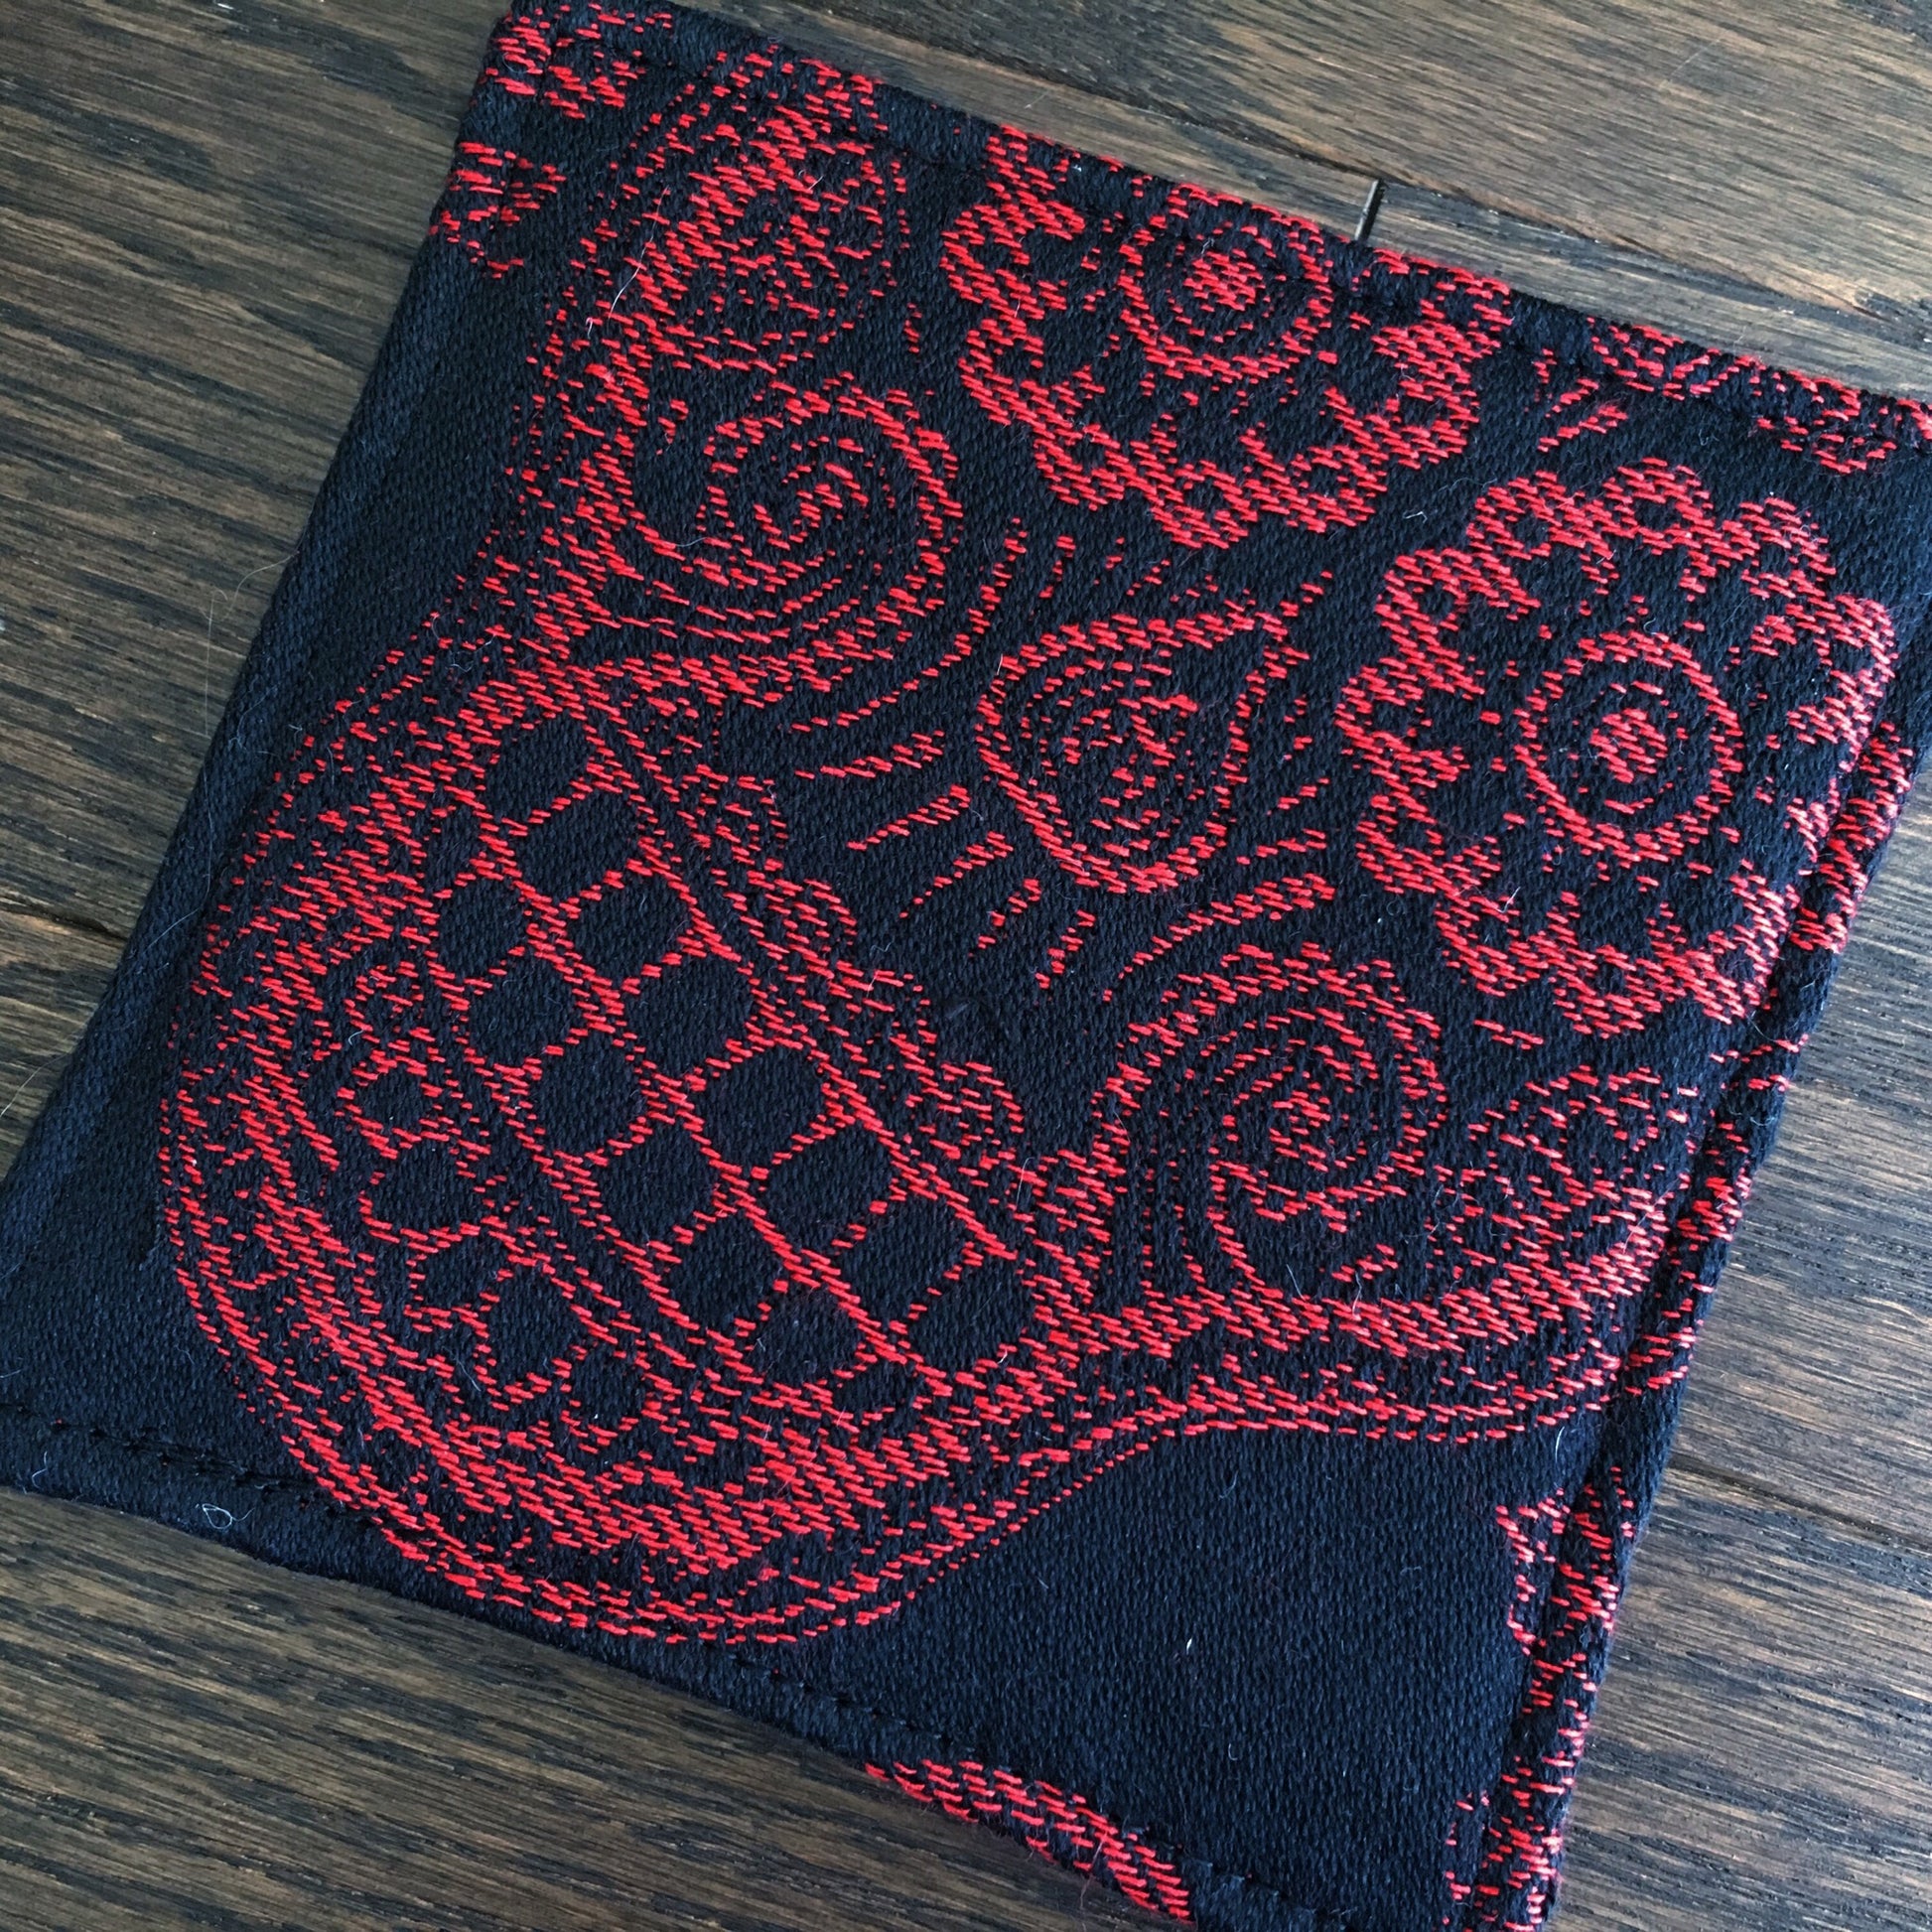 Image of a bold and handmade pirate themed mug rug. It features red and black paisley skull wrap scraps on one side and a blood red pirate mermaid crest embroidery design on the reverse.